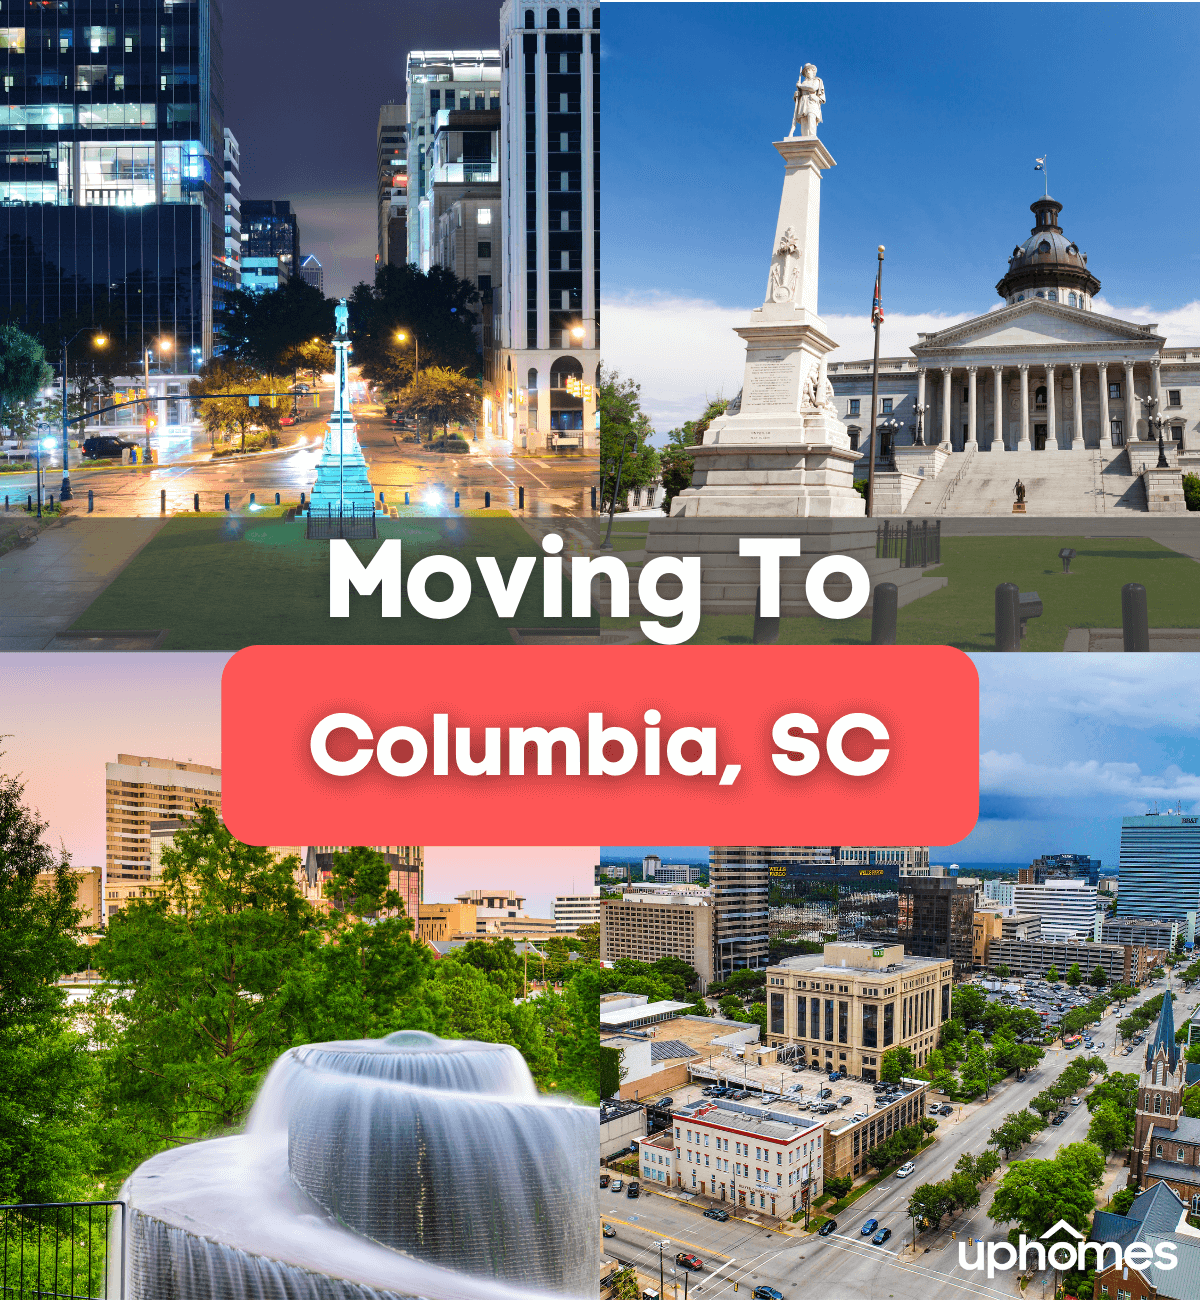 Moving to Columbia, SC - What is it like living in Columbia, SC?